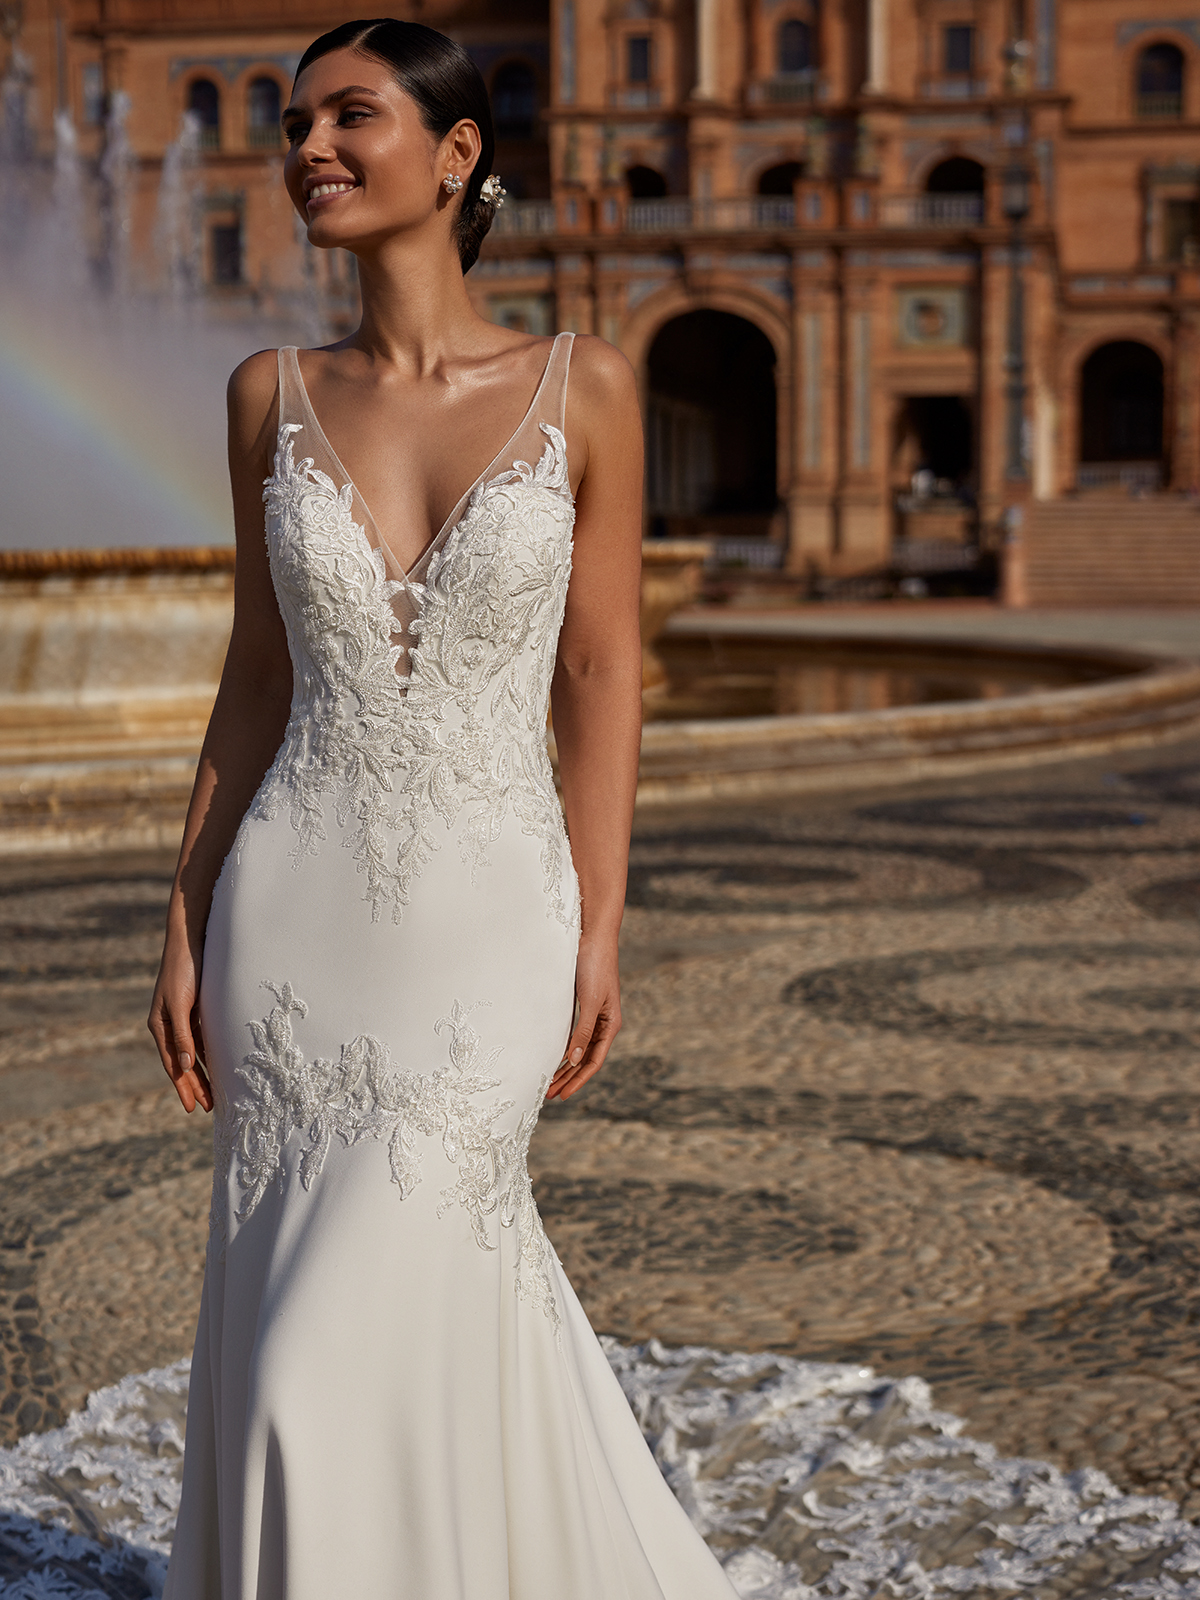 J6818 Wedding Dress from Moonlight Bridal - hitched.co.uk